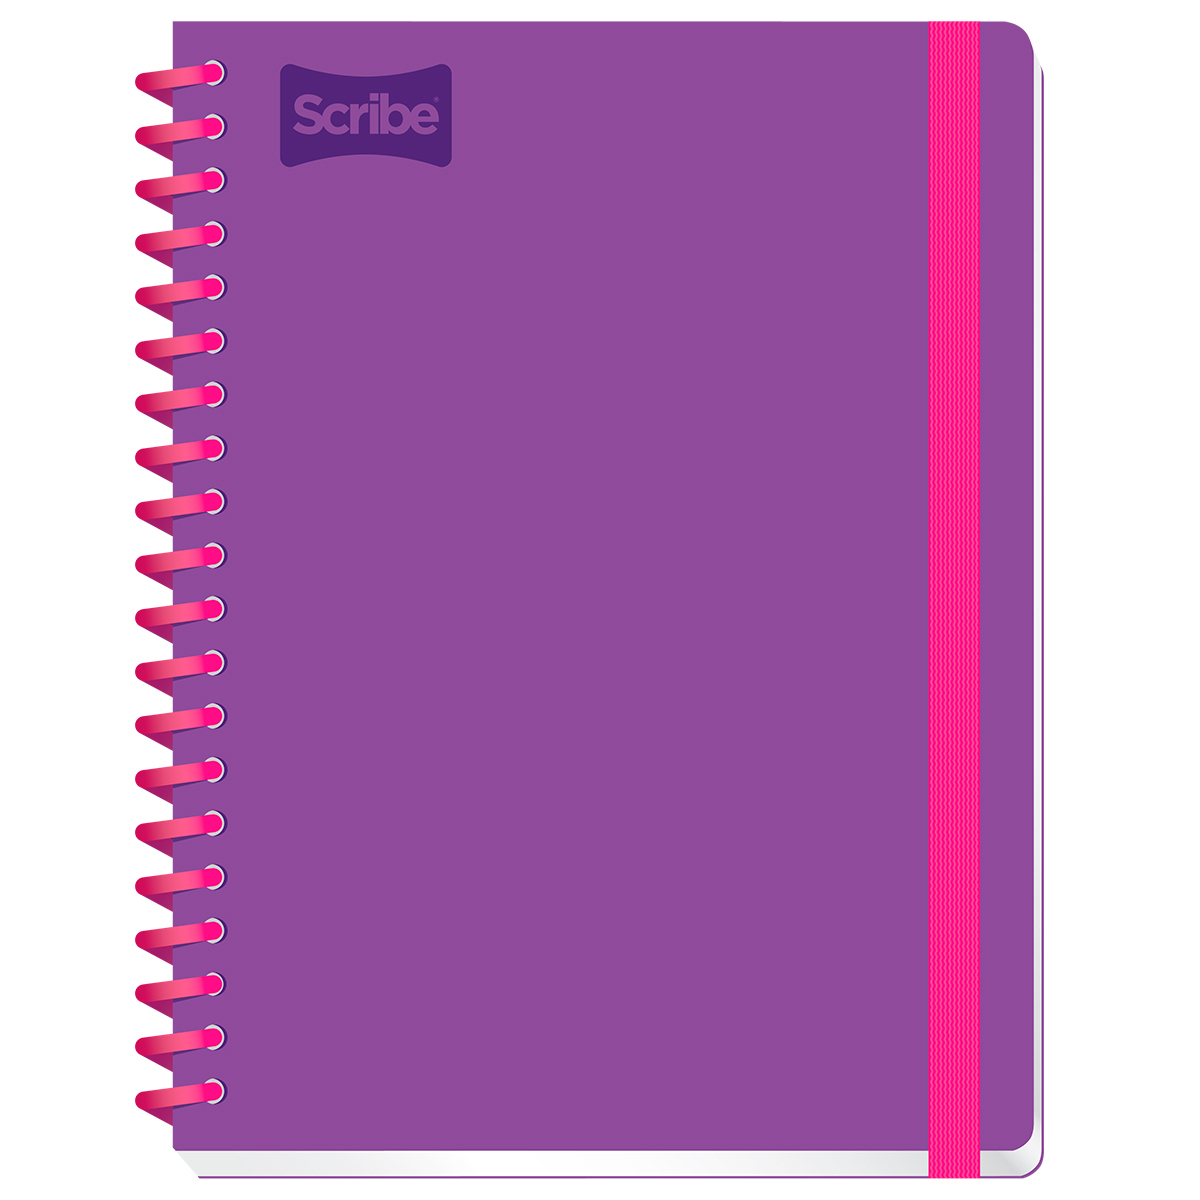 Cuaderno Profesional Scribe Excellence Raya 200 hojas | Office Depot Mexico